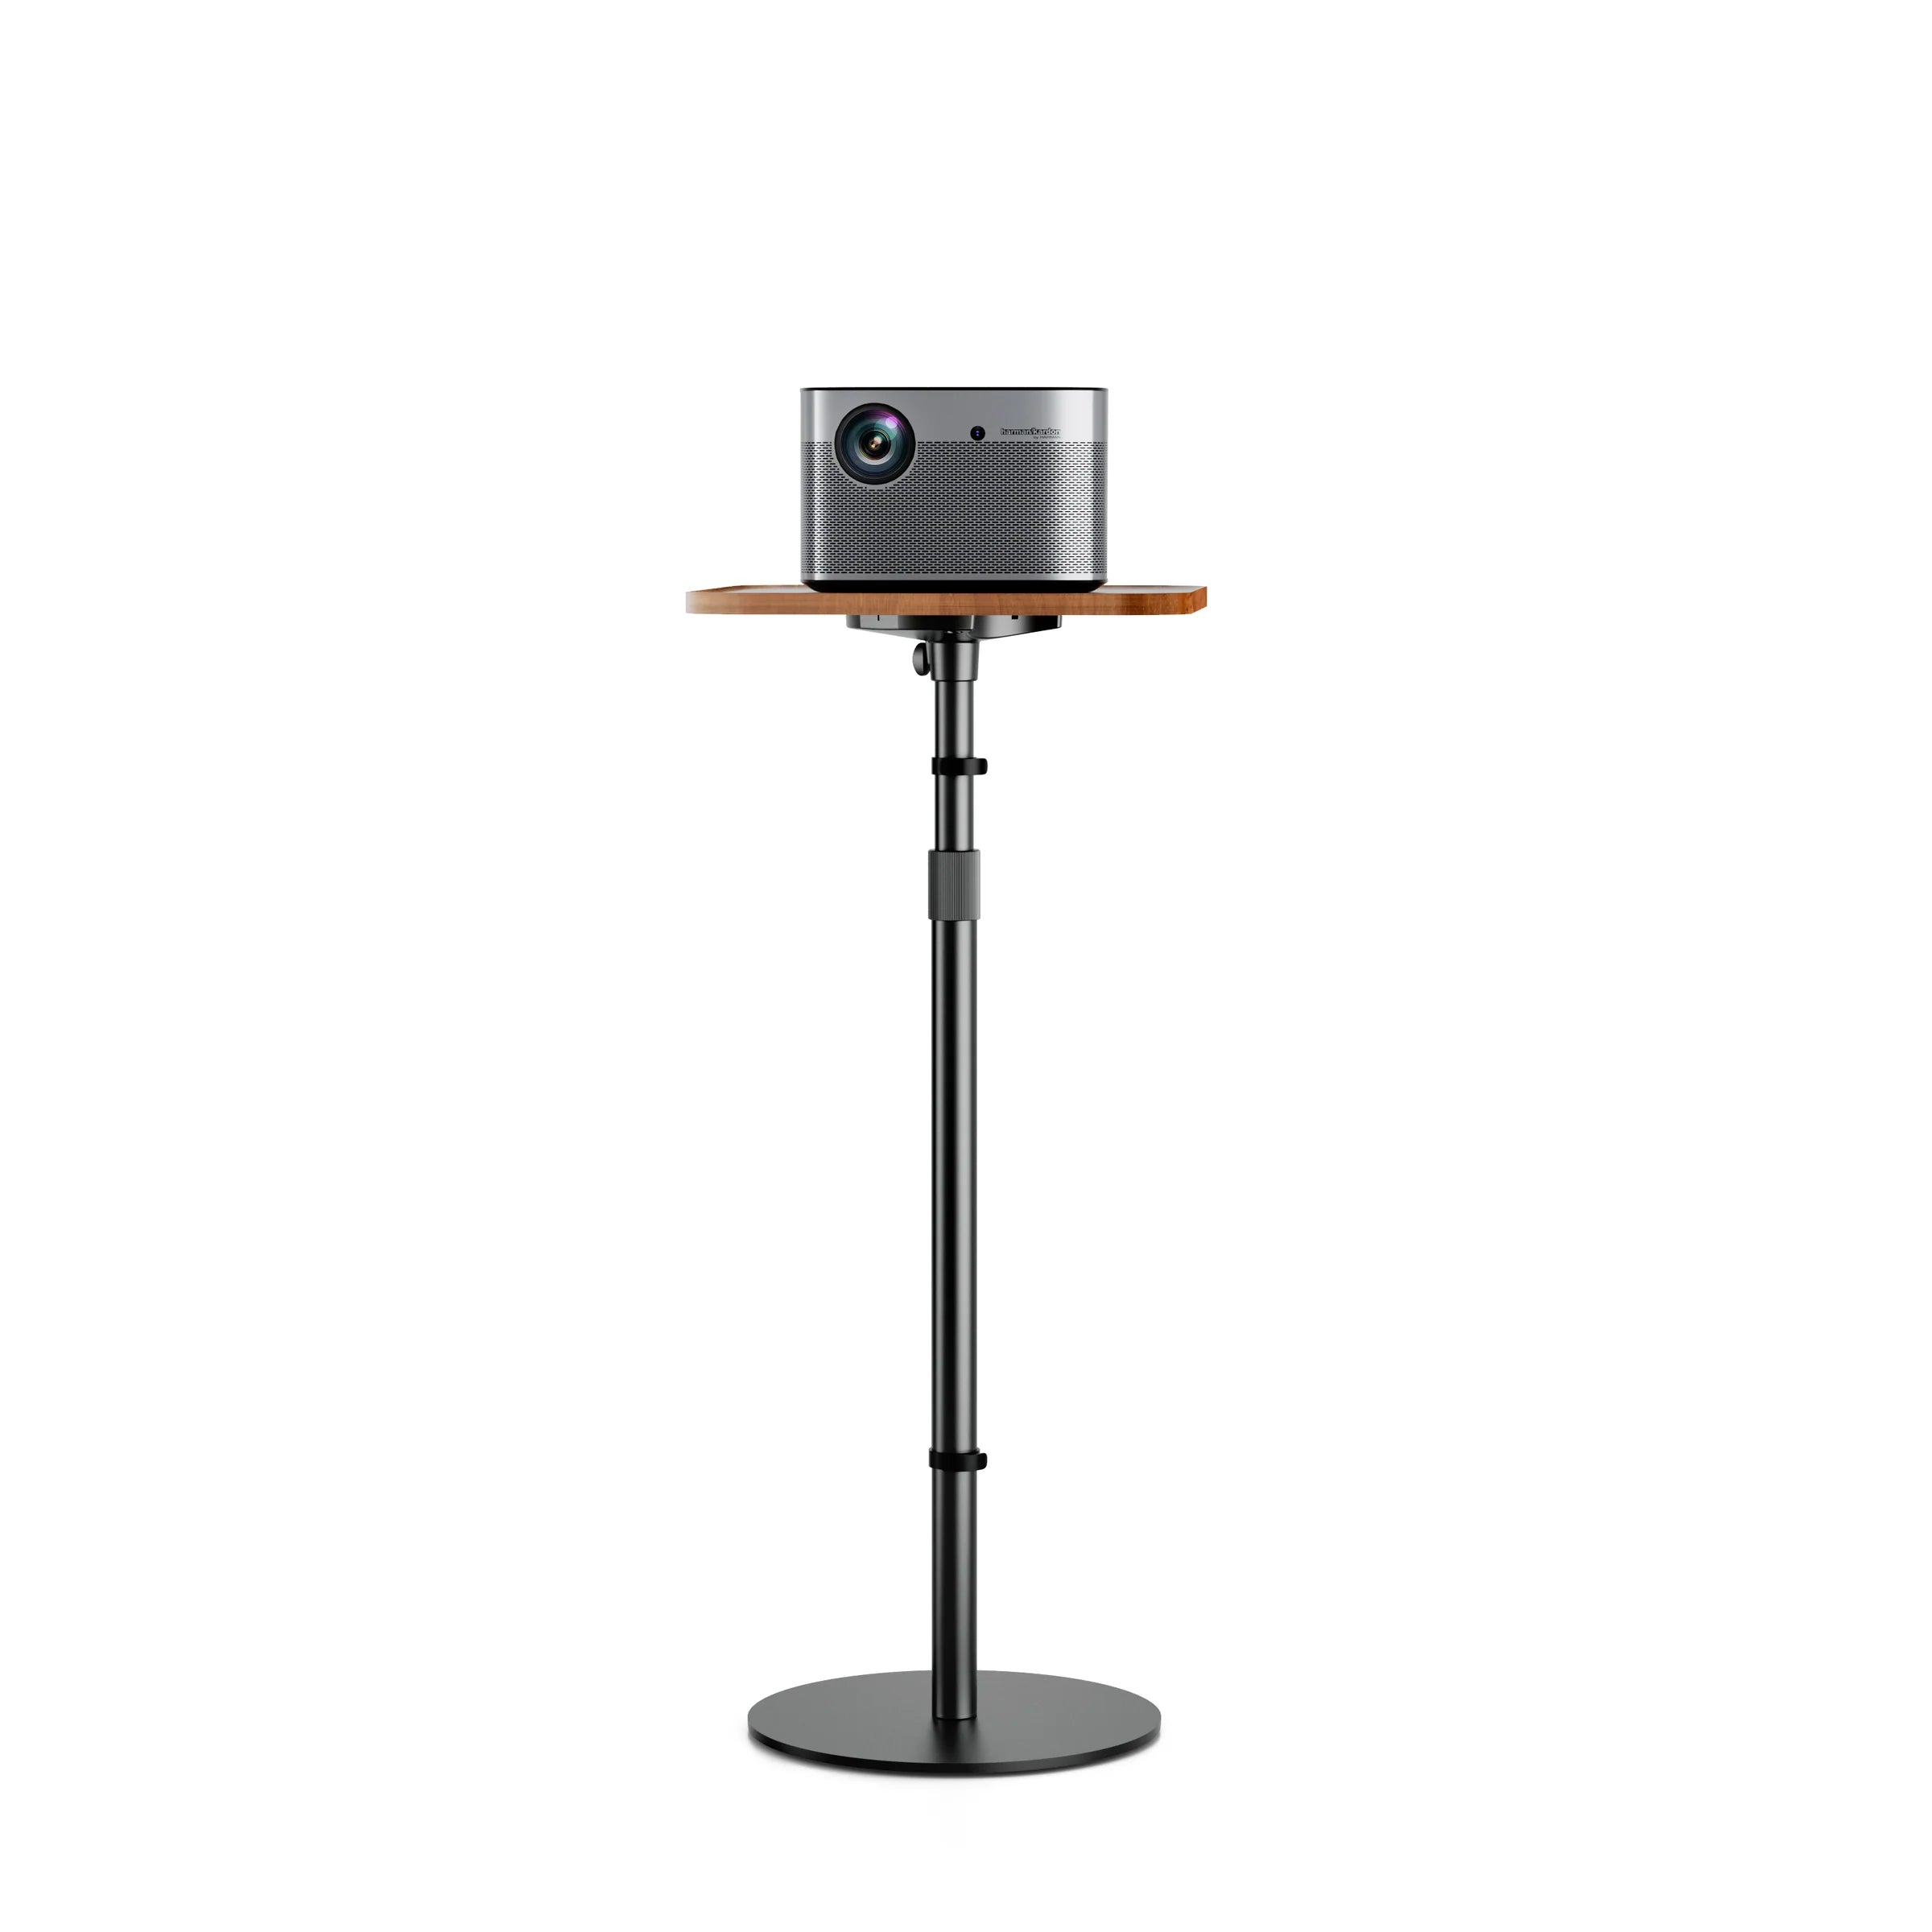 SKY L38 Multifunctional Projector Stand